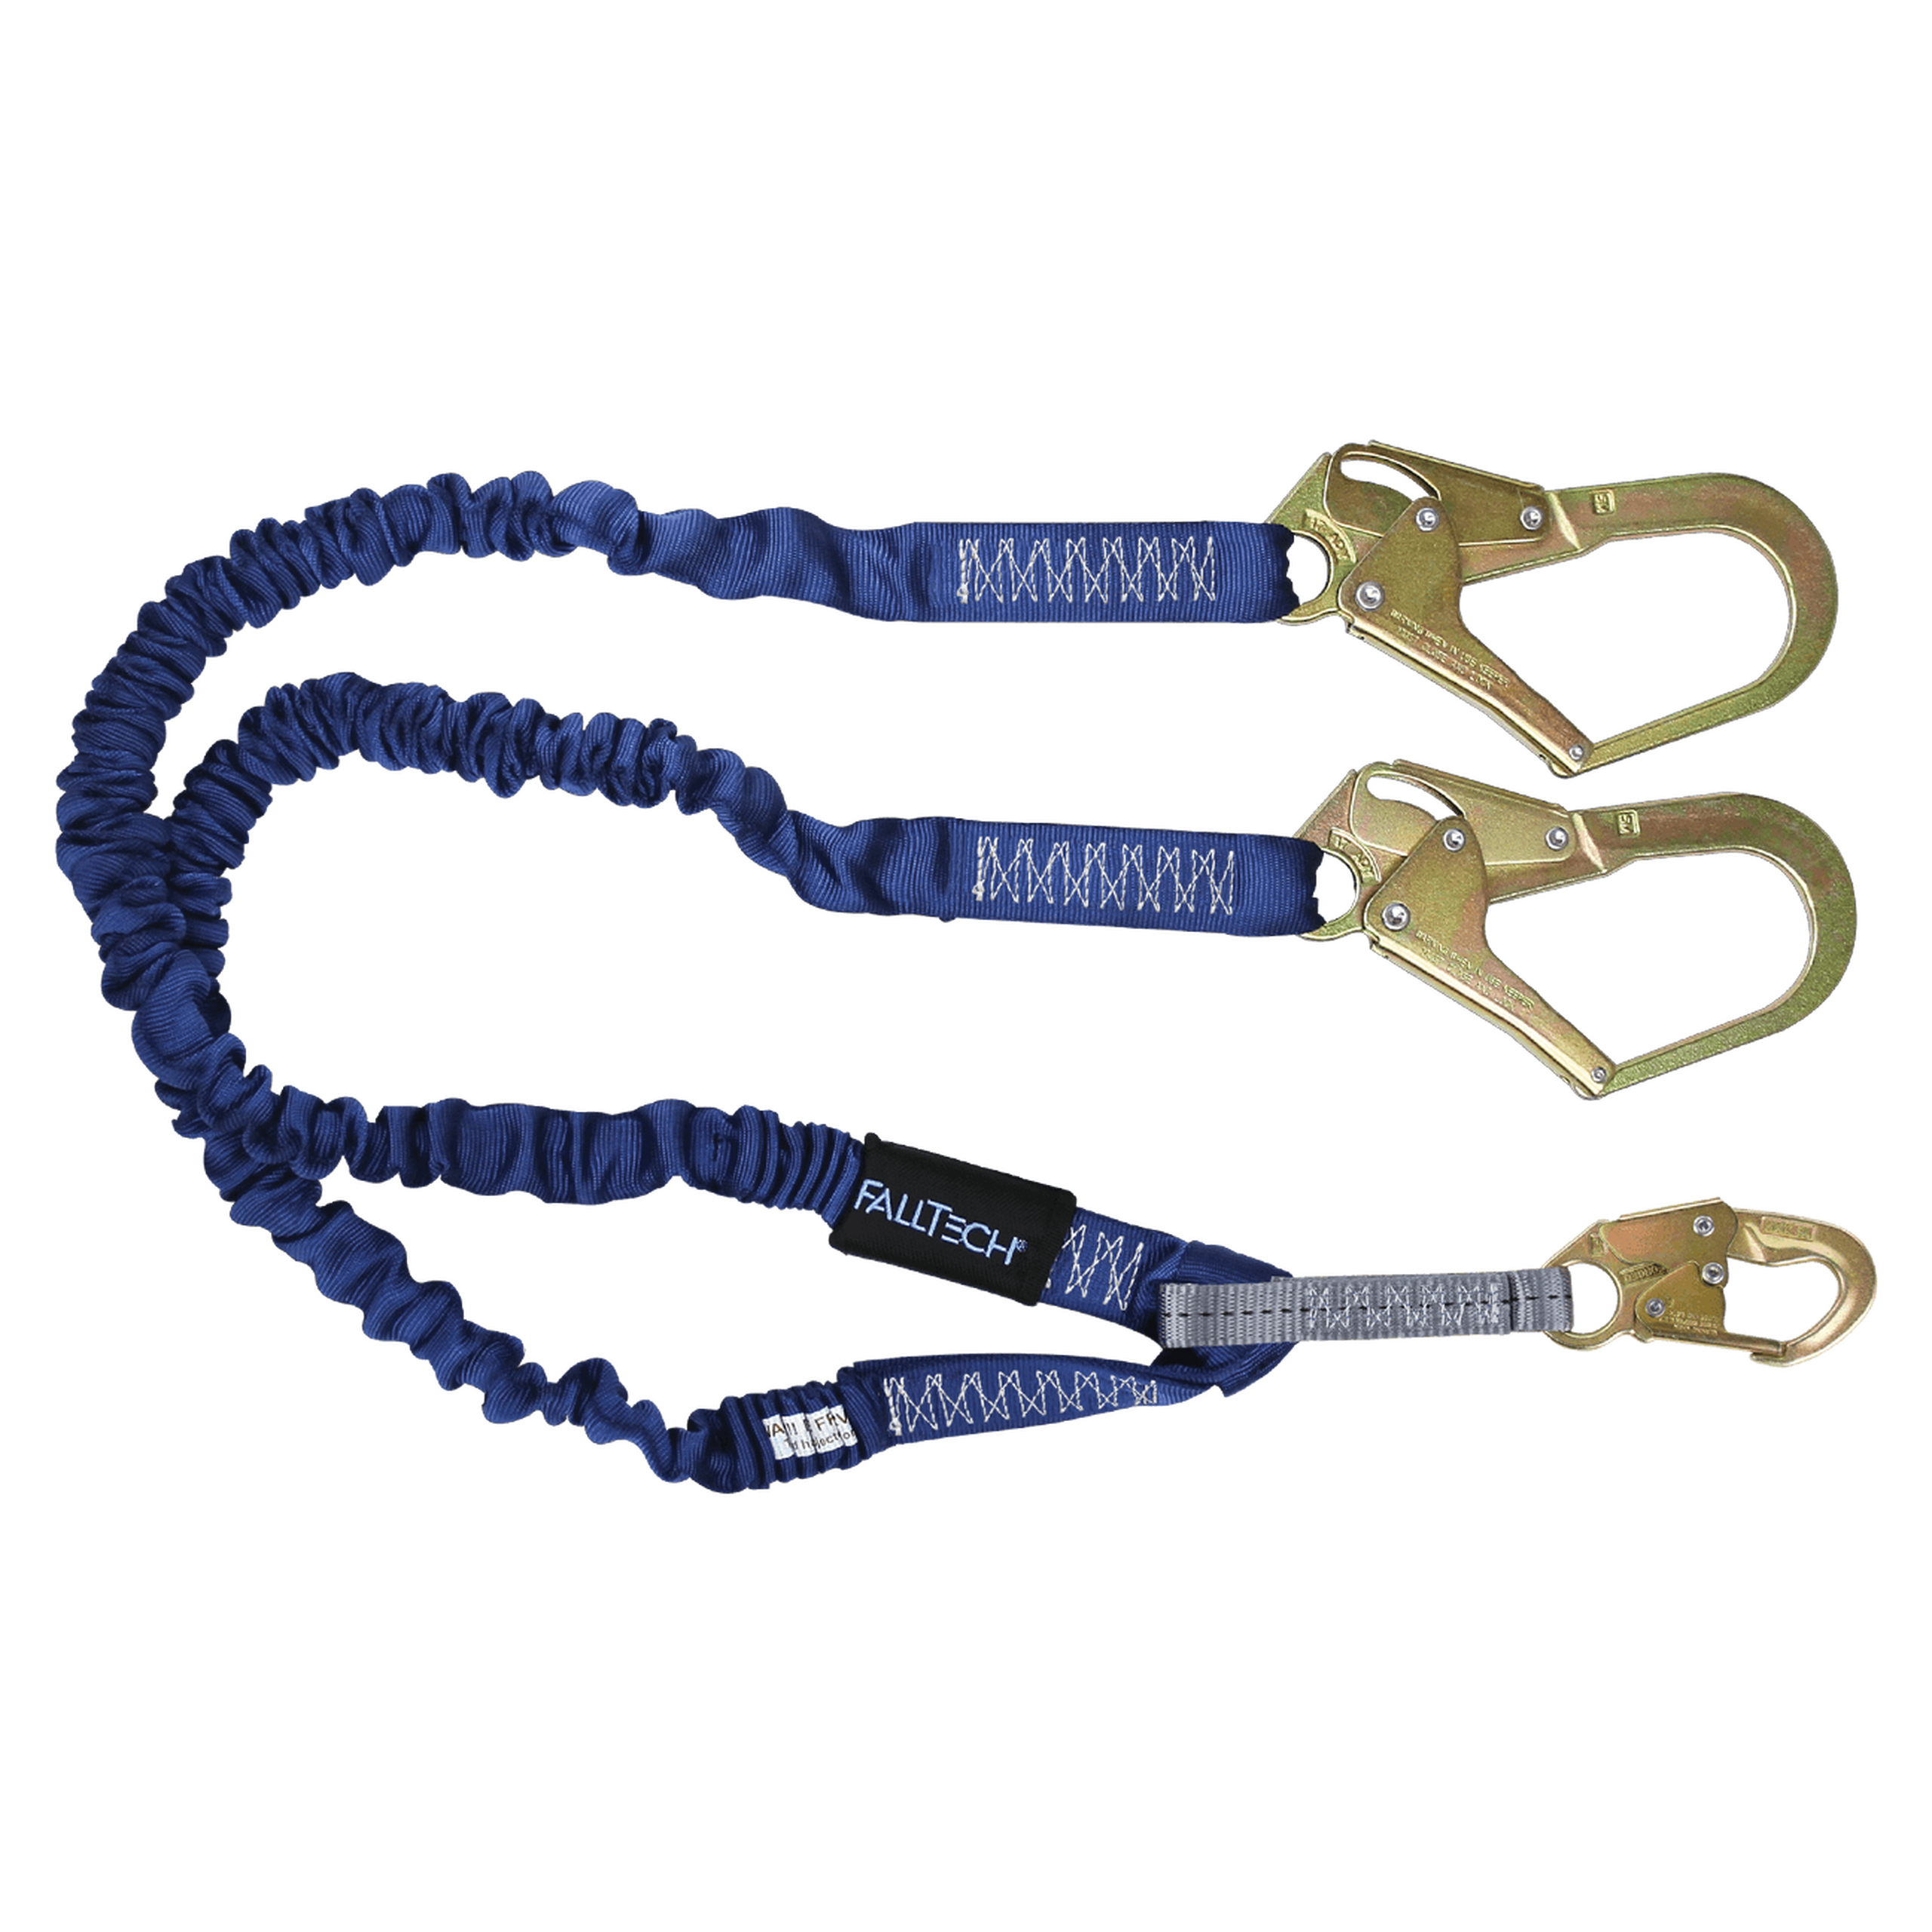 FallTech 8240Y3 4½' to 6' ElasTech® Energy Absorbing Lanyard, Double-leg with Steel Connectors (each)